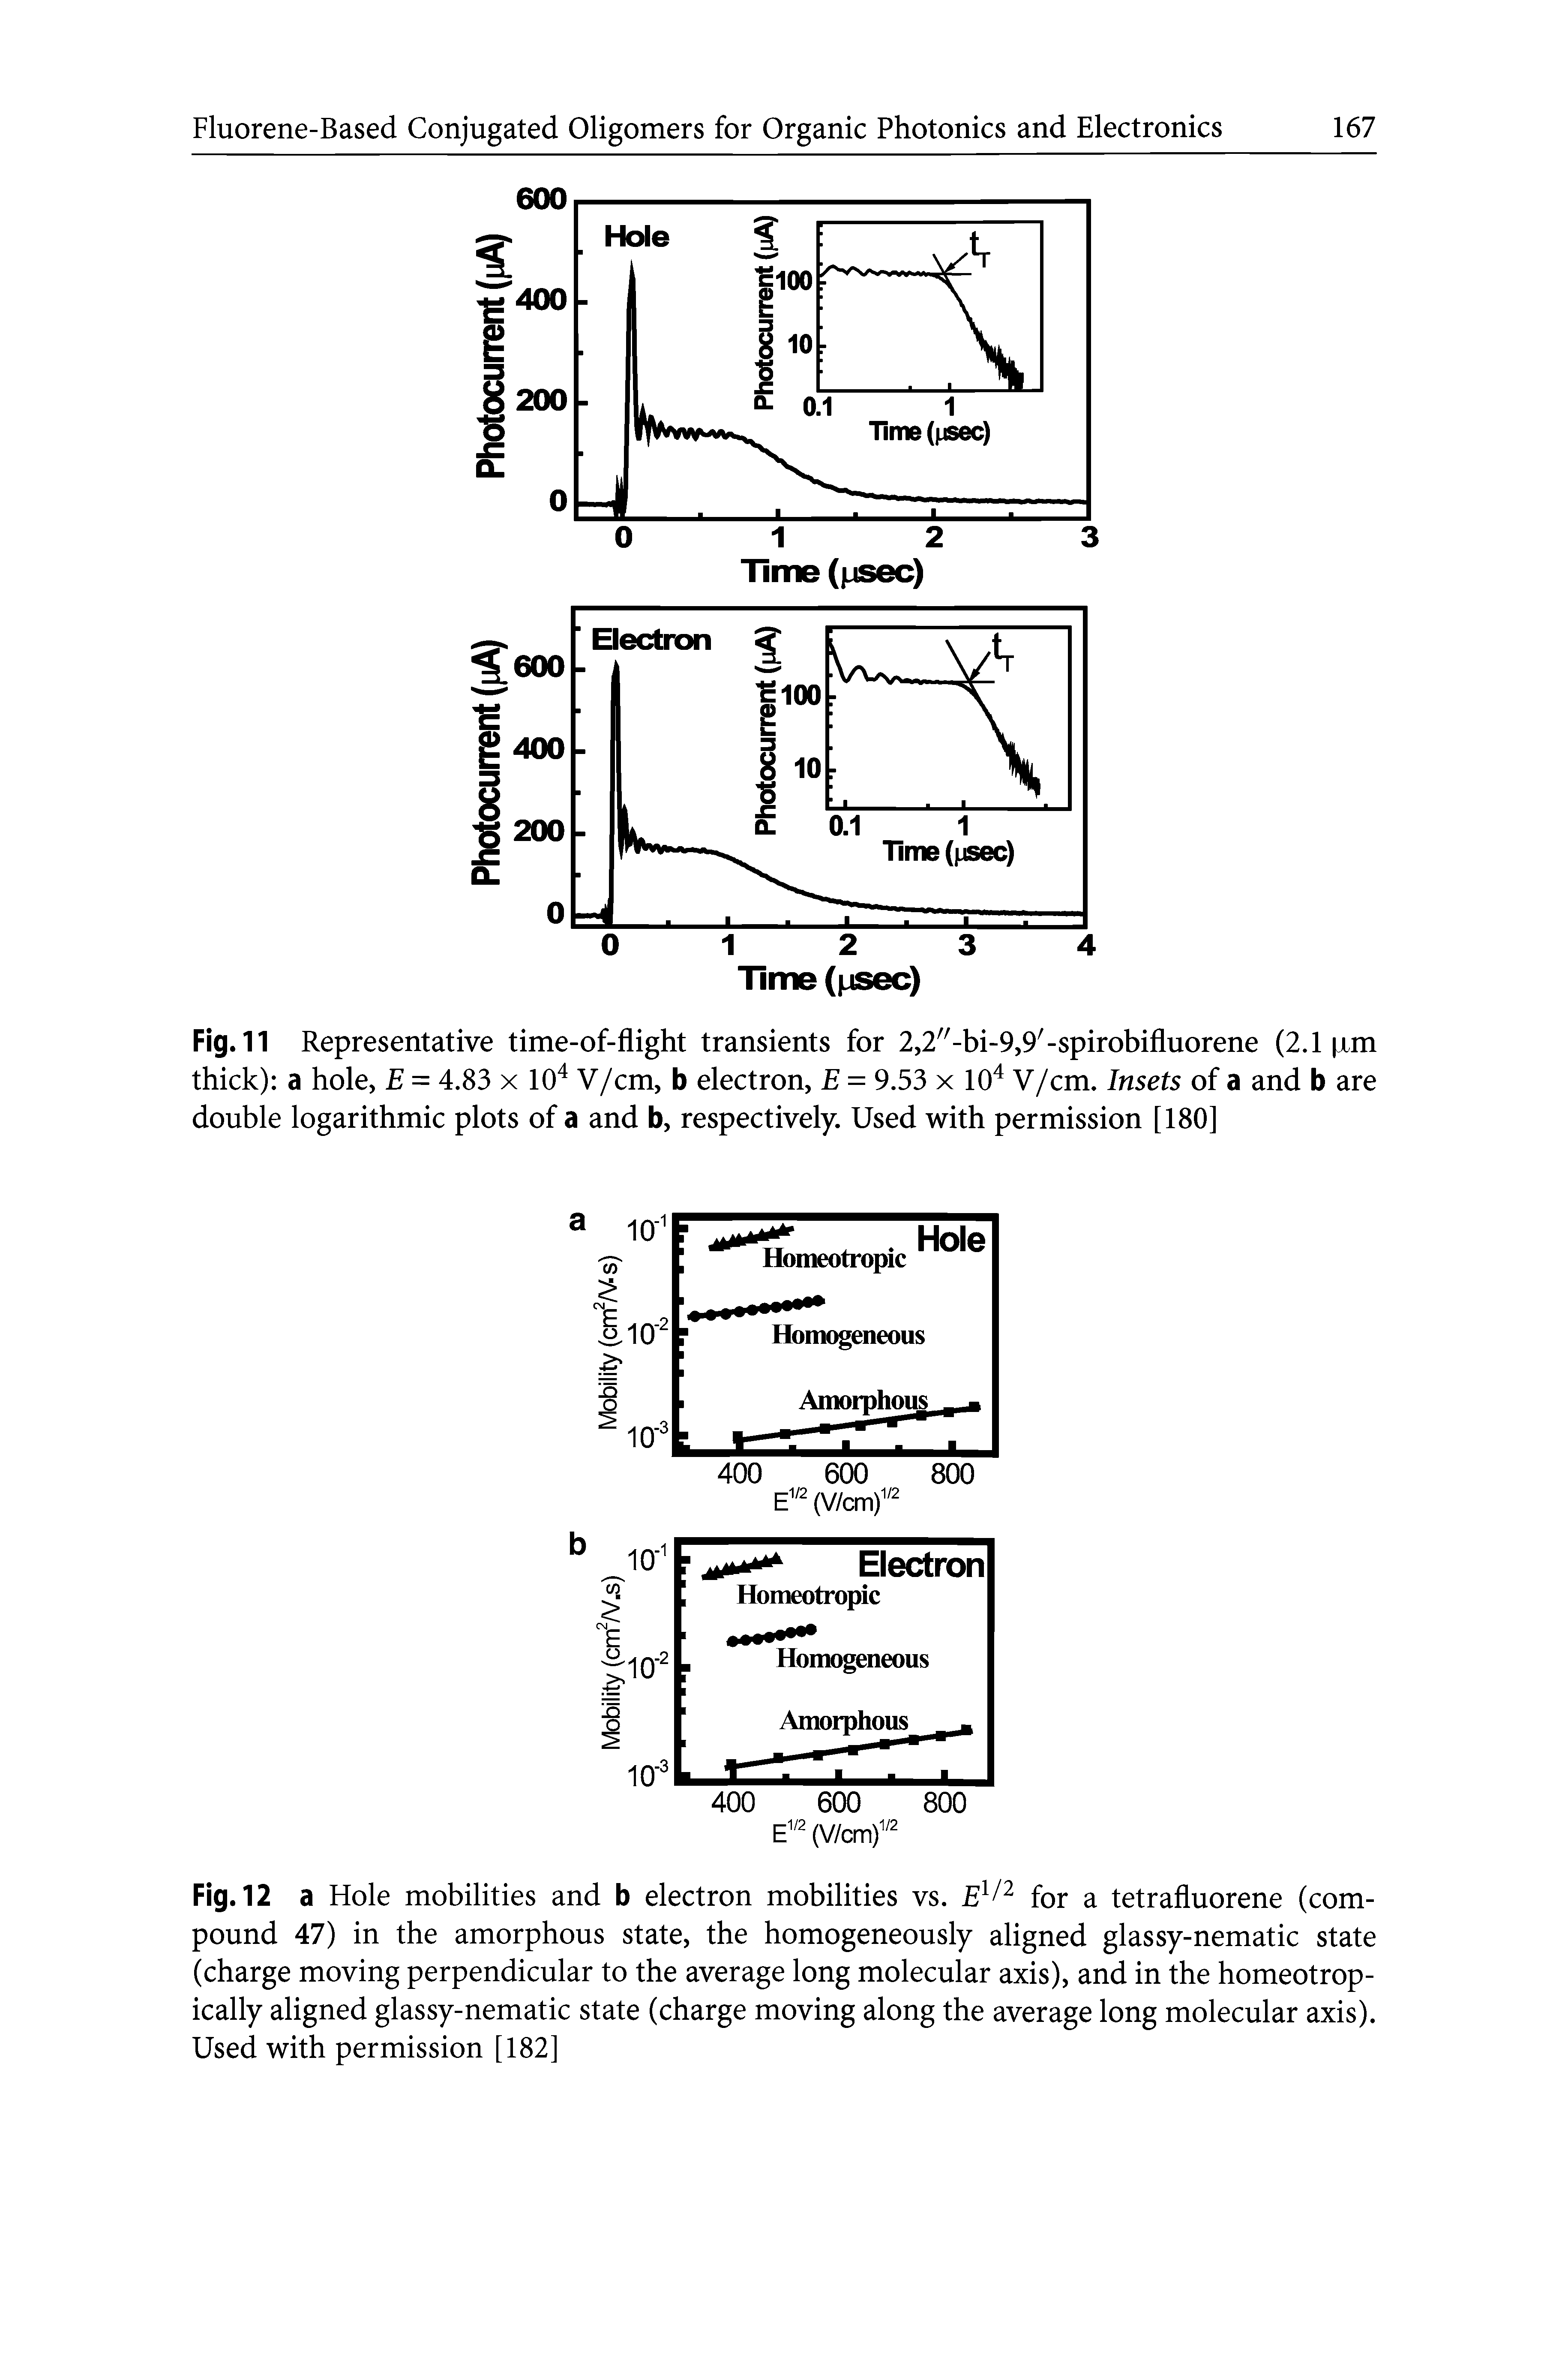 Fig. 11 Representative time-of-flight transients for 2,2//-bi-9,9/-spirobifluorene (2.1 [im thick) a hole, E = 4.83 x 104 V/cm, b electron, E = 9.53 x 104 V/cm. Insets of a and b are double logarithmic plots of a and b, respectively. Used with permission [180]...